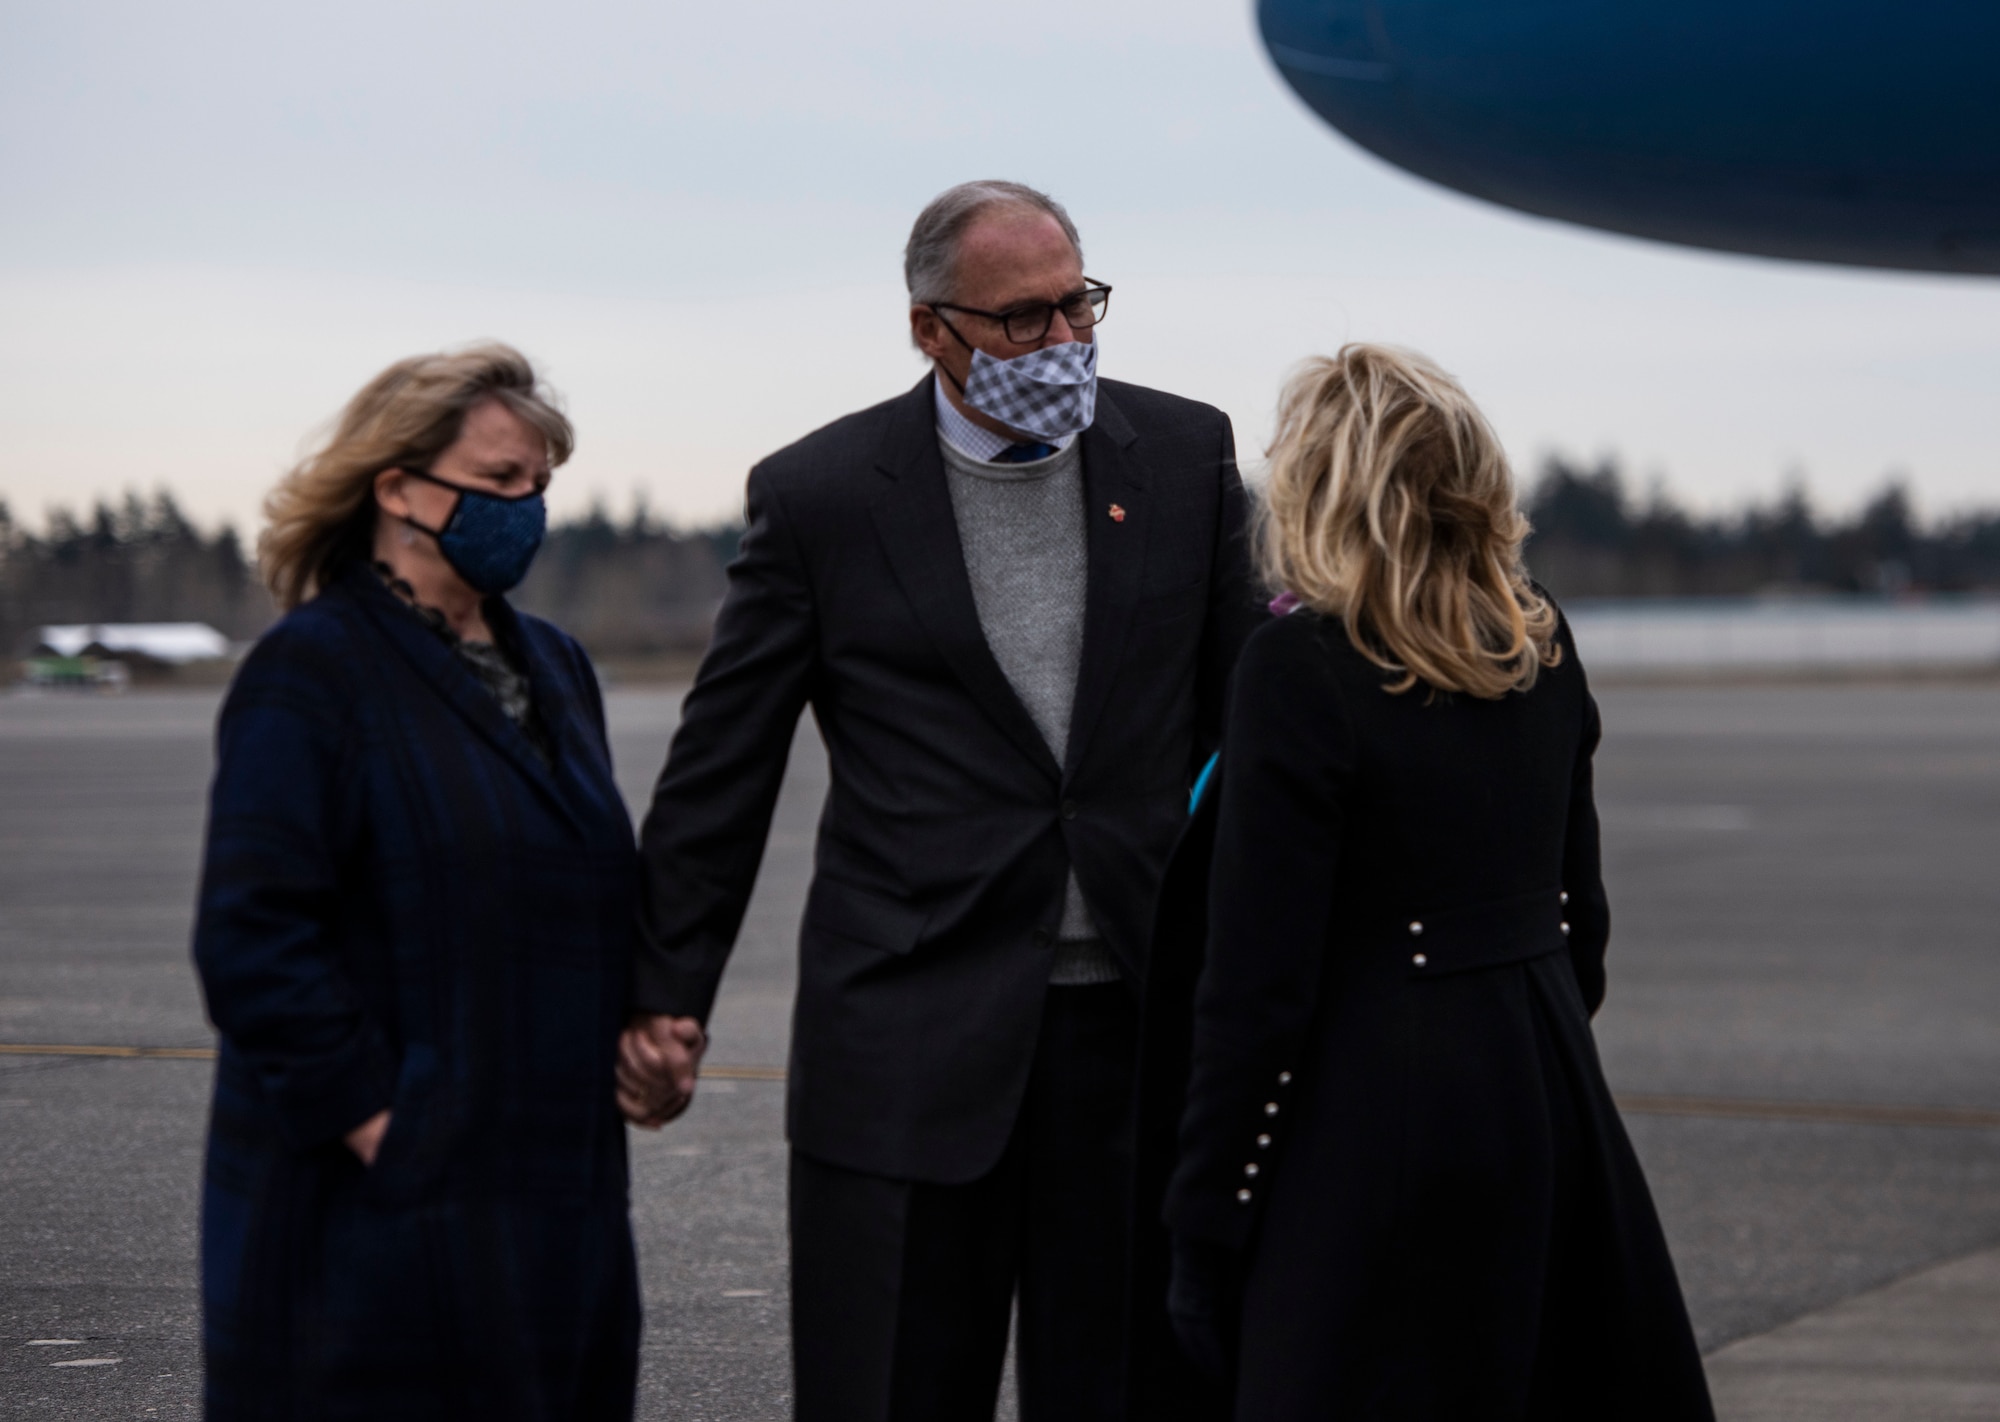 First Lady Dr. Jill Biden is greeted by Jay Inslee, the governor of Washington, and his spouse, Trudee Inslee, at Joint Base Lewis-McChord, Washington, March 8, 2021. Biden visited with military families as part of an on-going effort to relaunch Joining Forces, an initiative to support service members, veterans and their families through wellness, education, and employment opportunities. (U.S. Air Force photo by Staff Sgt. Rachel Williams)